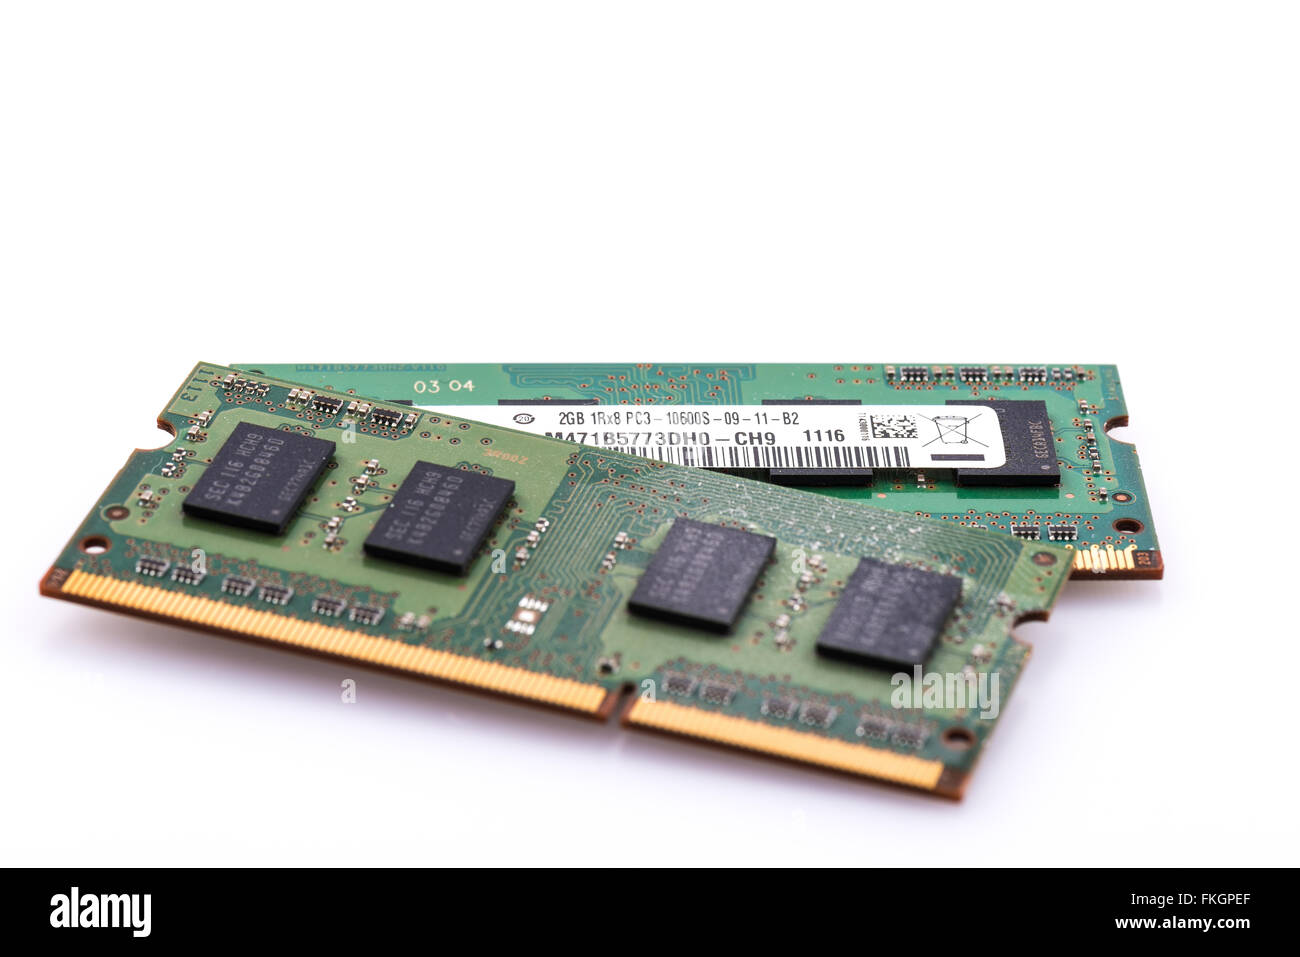 Two SODIMM memory modules on a white background Stock Photo